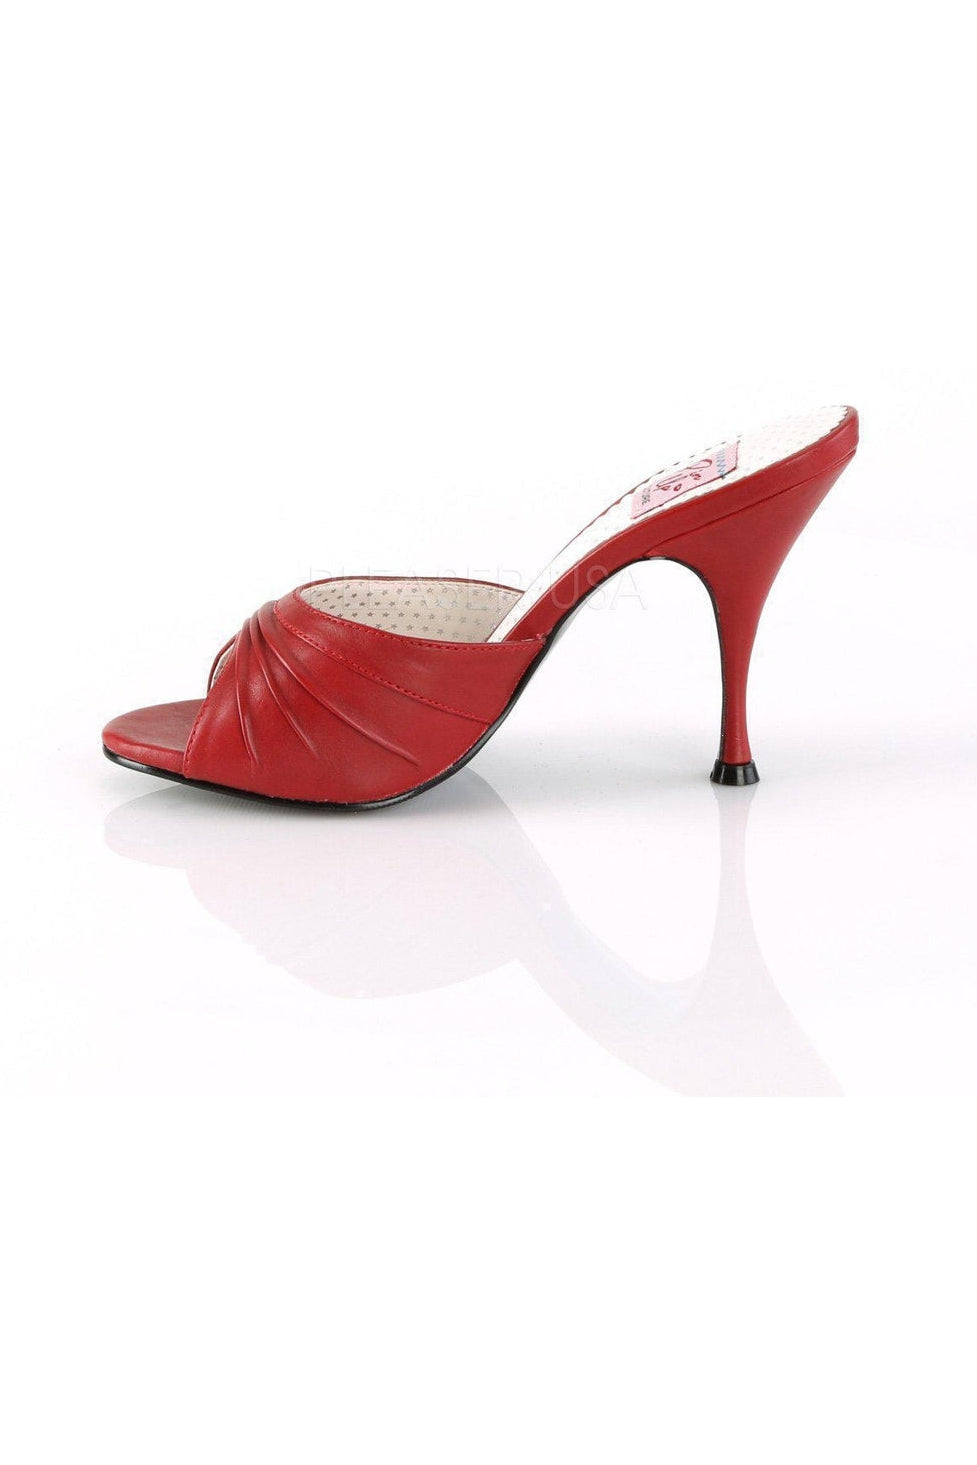 MONROE-01 Slide | Red Faux Leather-Pin Up Couture-SEXYSHOES.COM